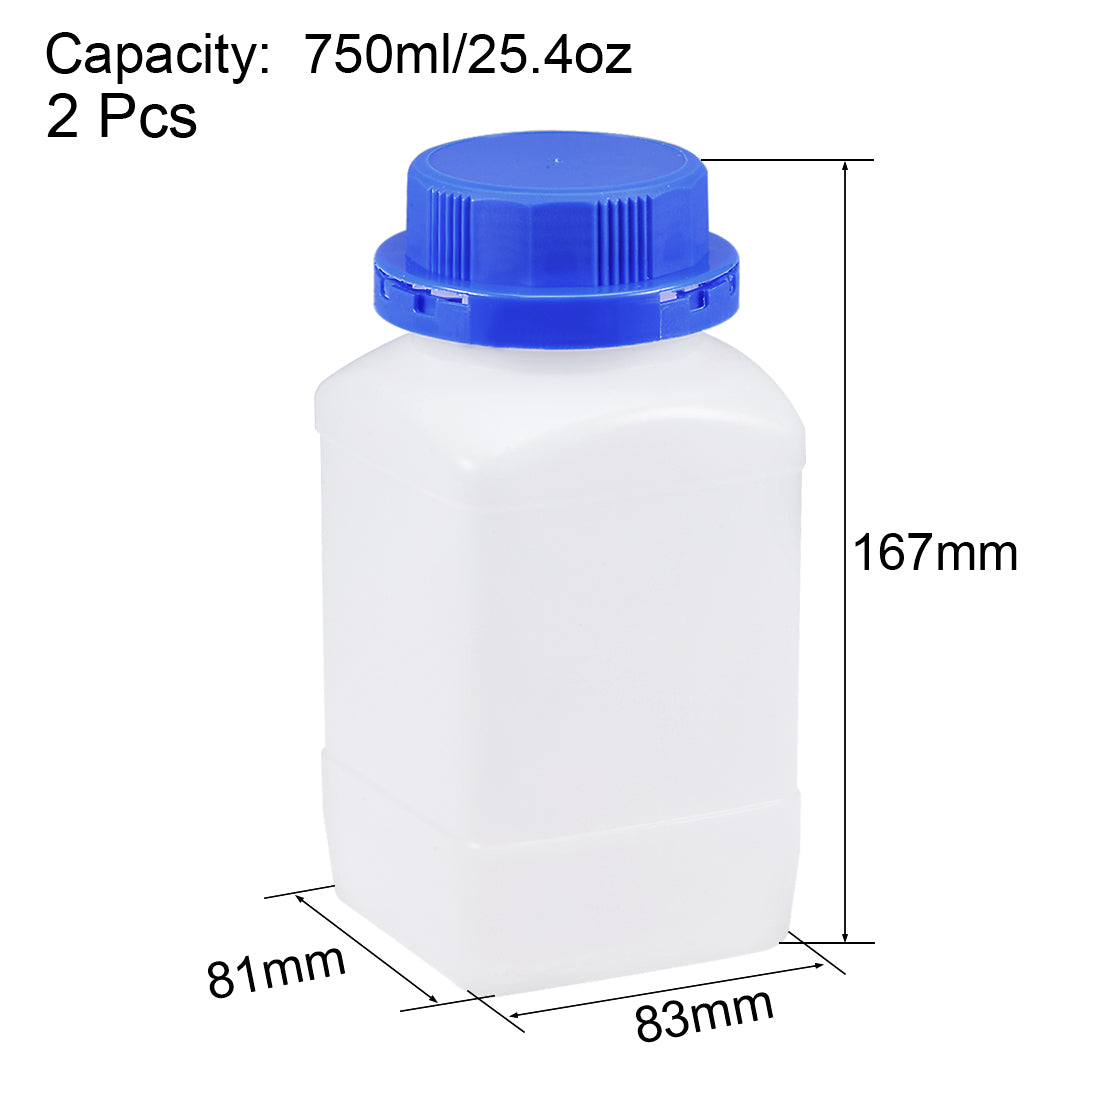 uxcell Uxcell Plastic Lab Chemical Reagent Bottle 750ml/25.4oz Wide Mouth Sample Sealing Liquid Storage Container Translucent 2pcs